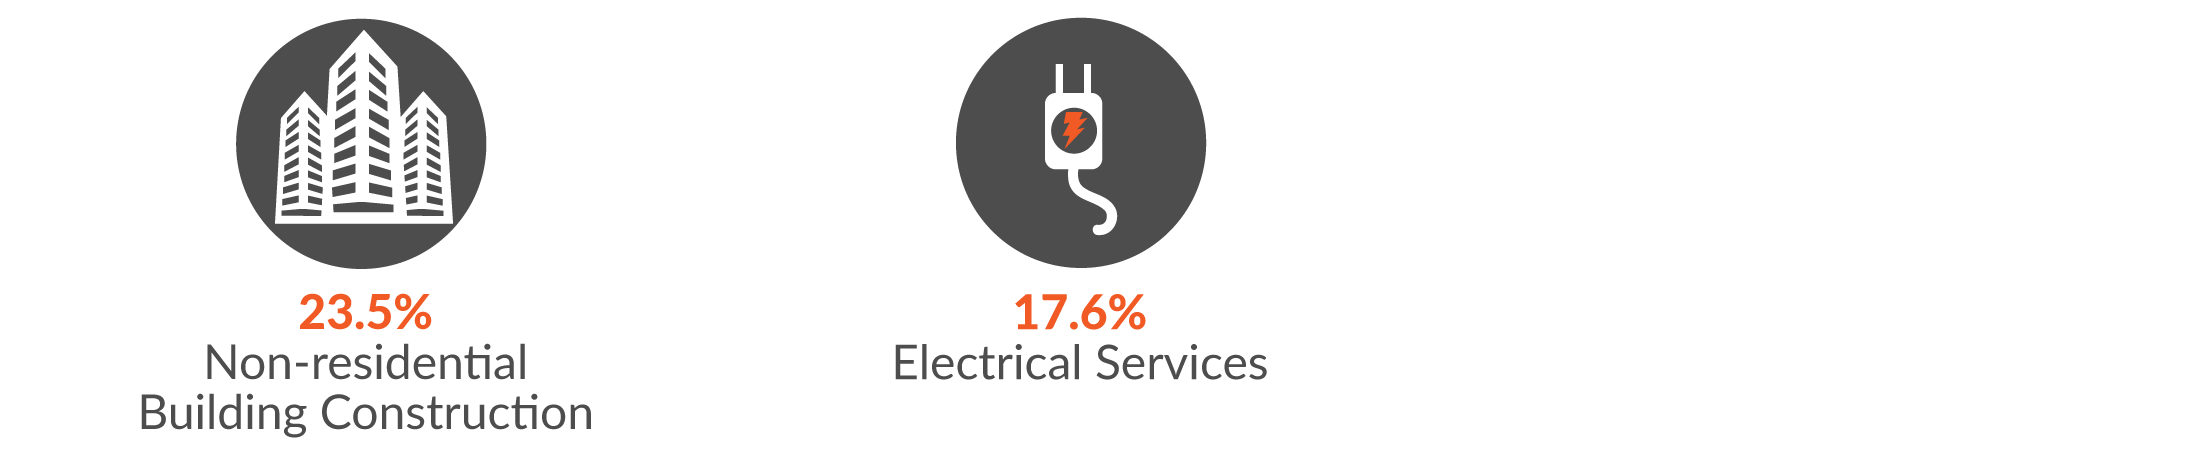 This infographic shows 23.5% of Construction serious injury claims were in Non-residential building construction and 17.6% in Electrical Services.